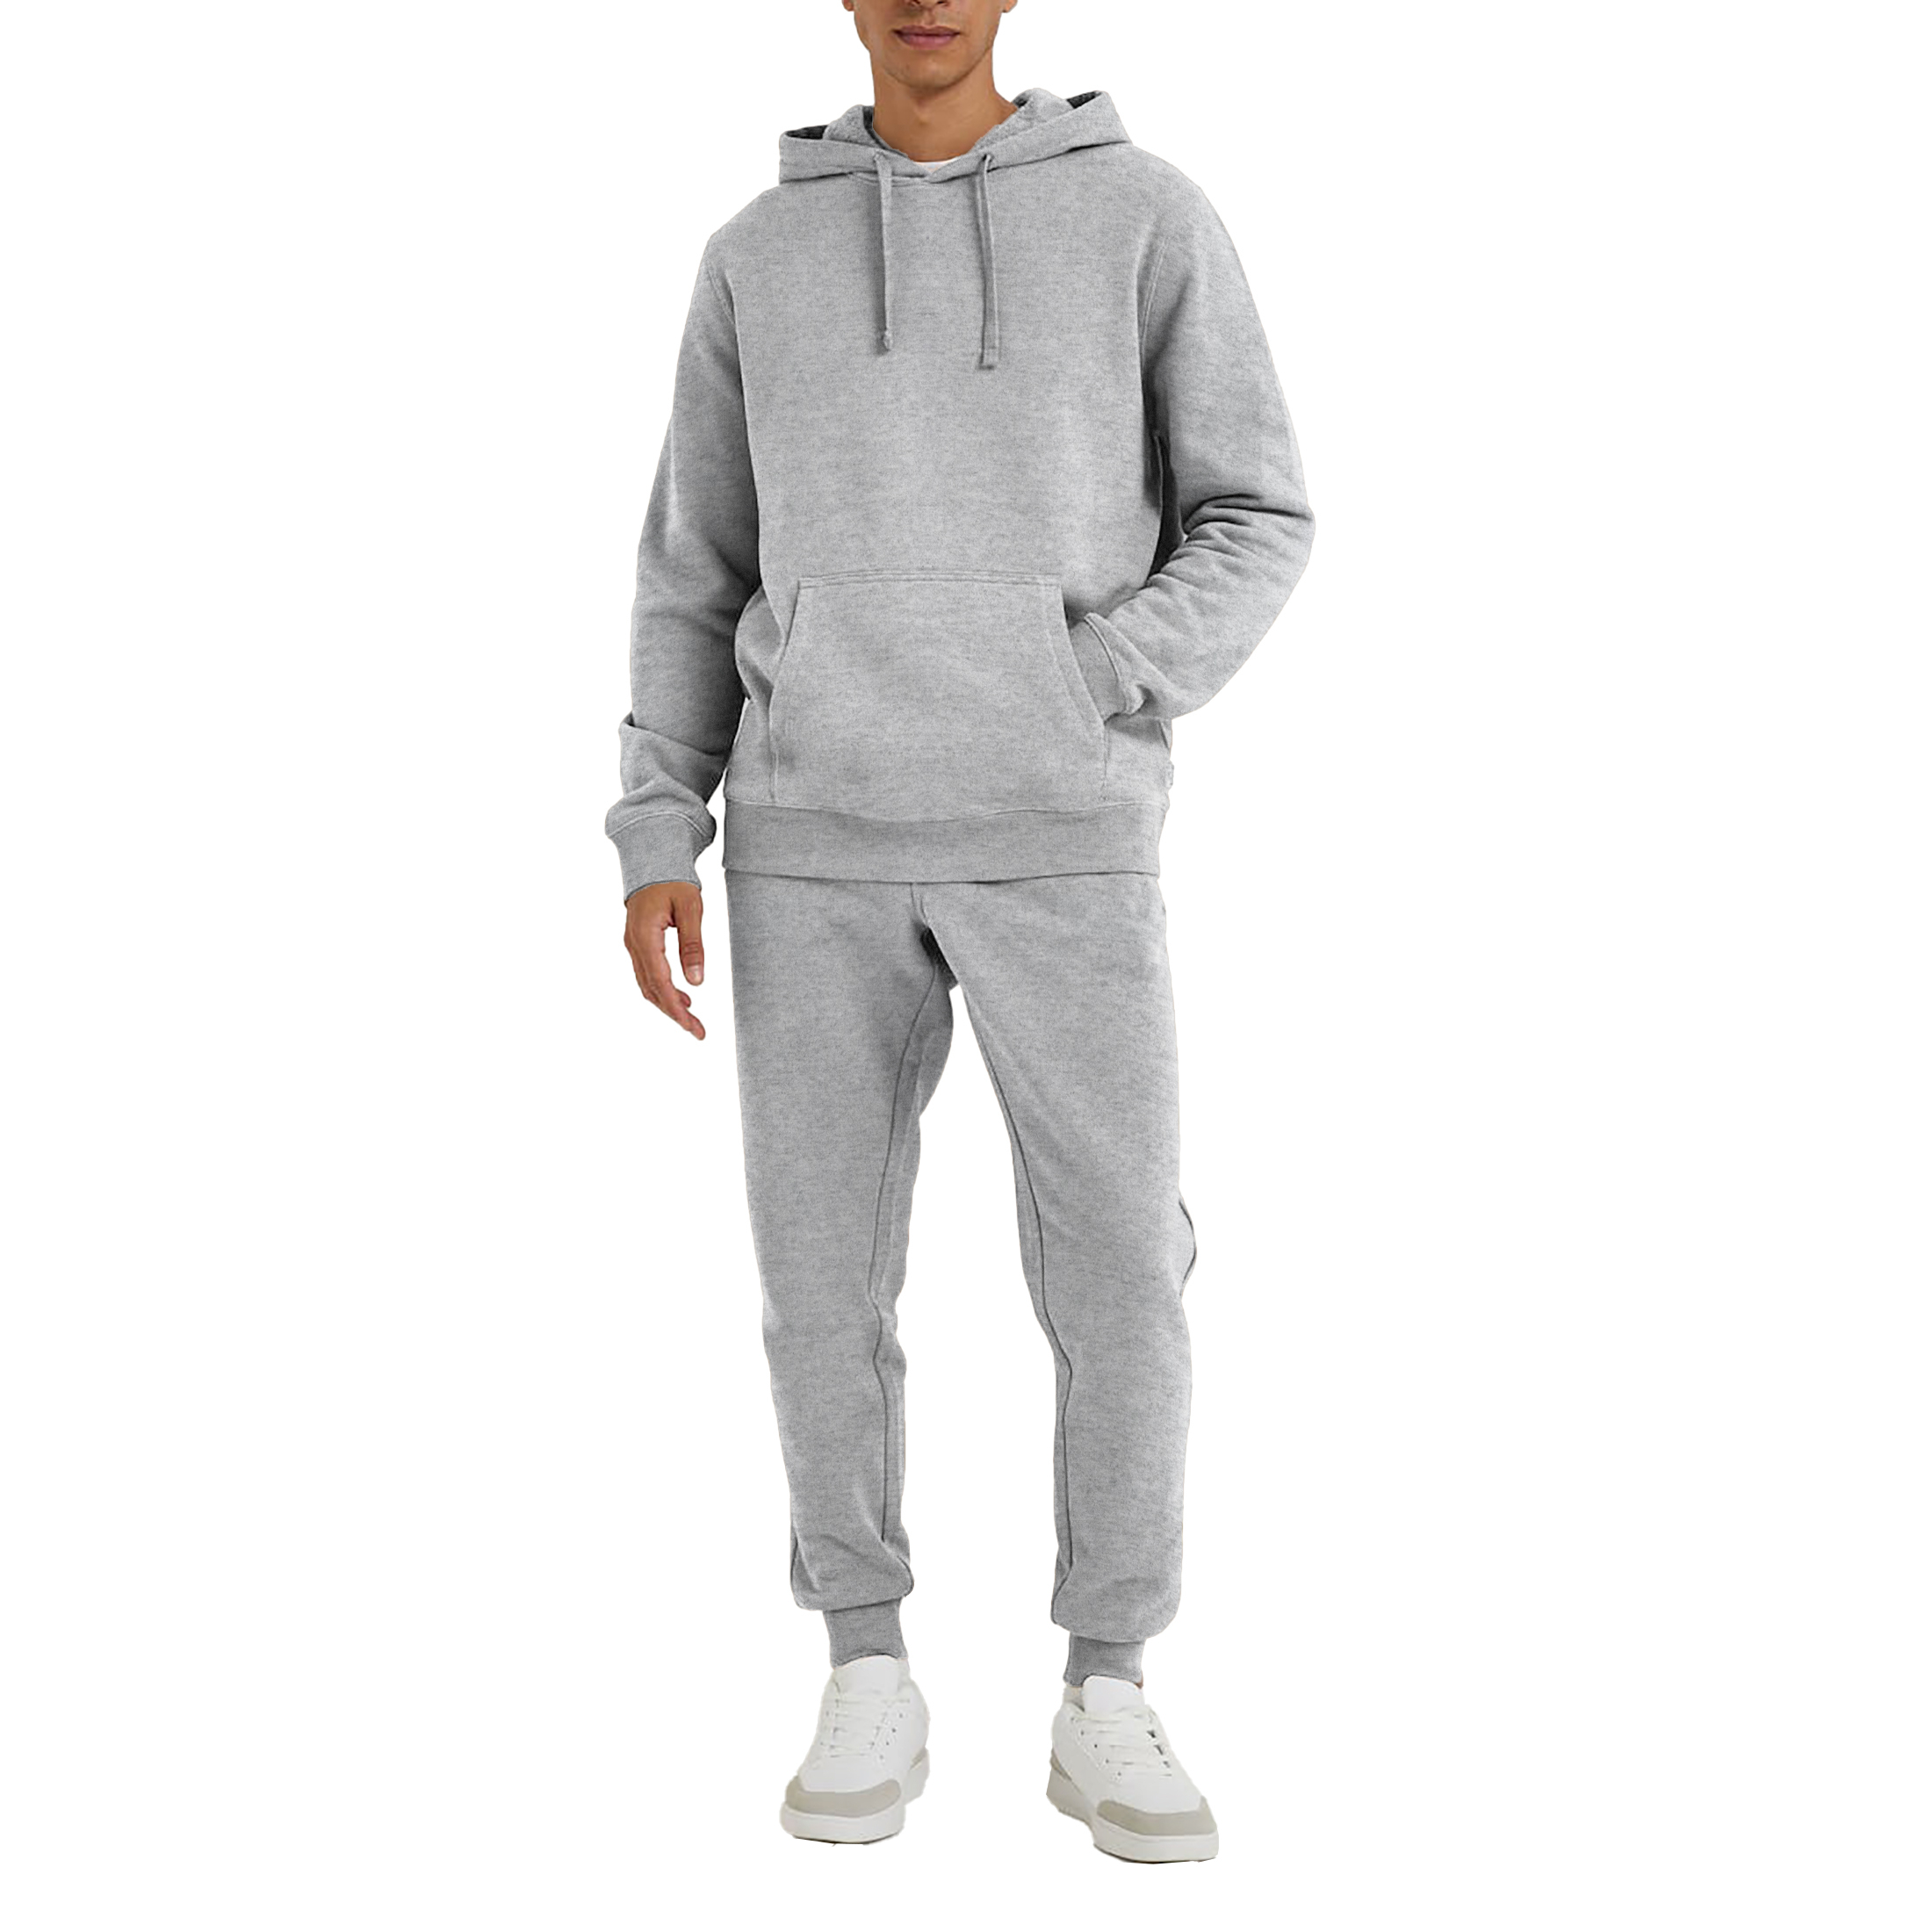 Men's Athletic Warm Jogging Pullover Active Tracksuit - Grey, 2X-Large